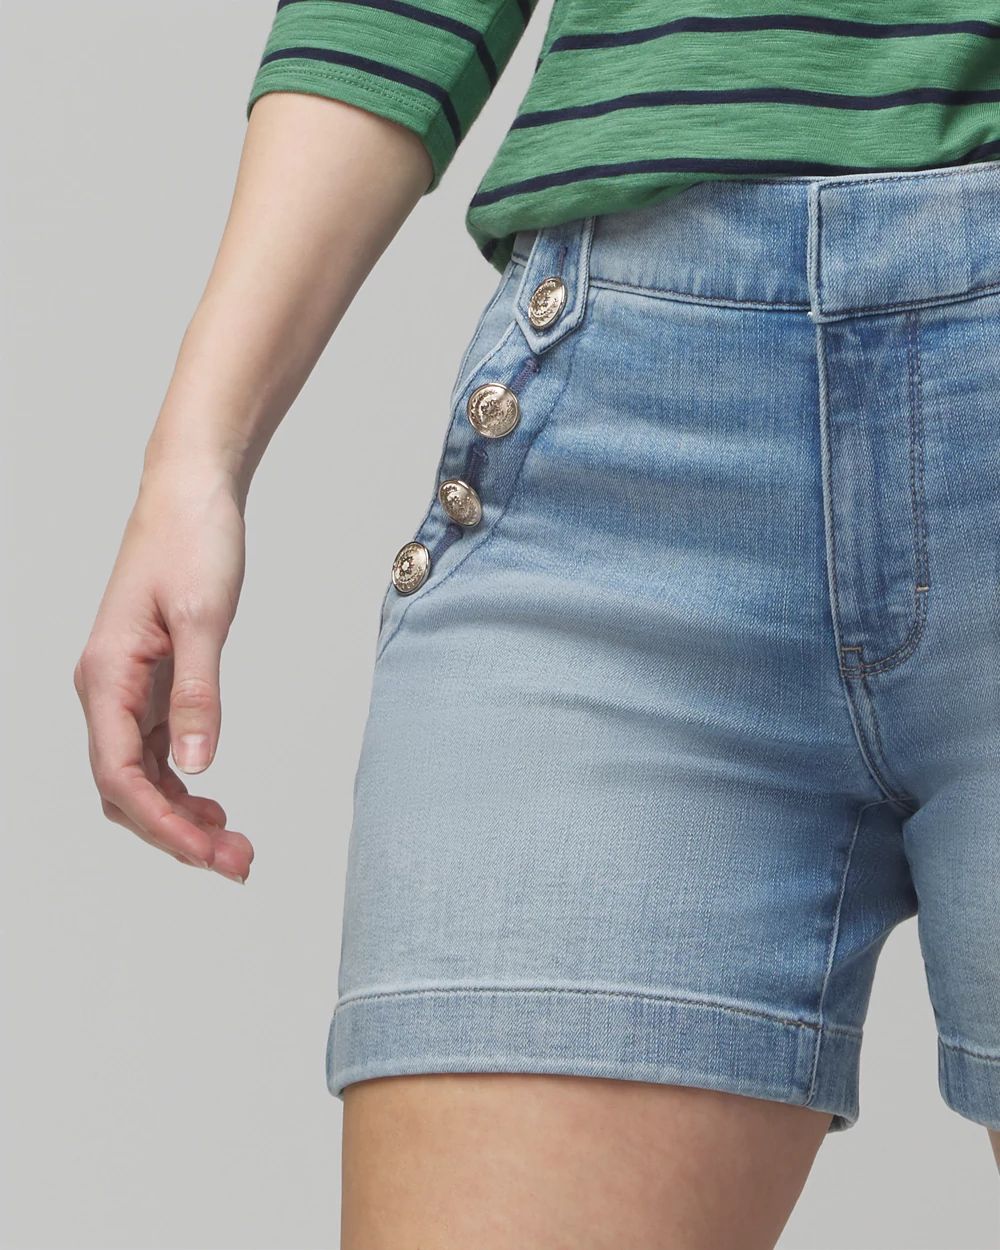 Curvy Everyday Soft Denim Mariner Button Shorts click to view larger image.